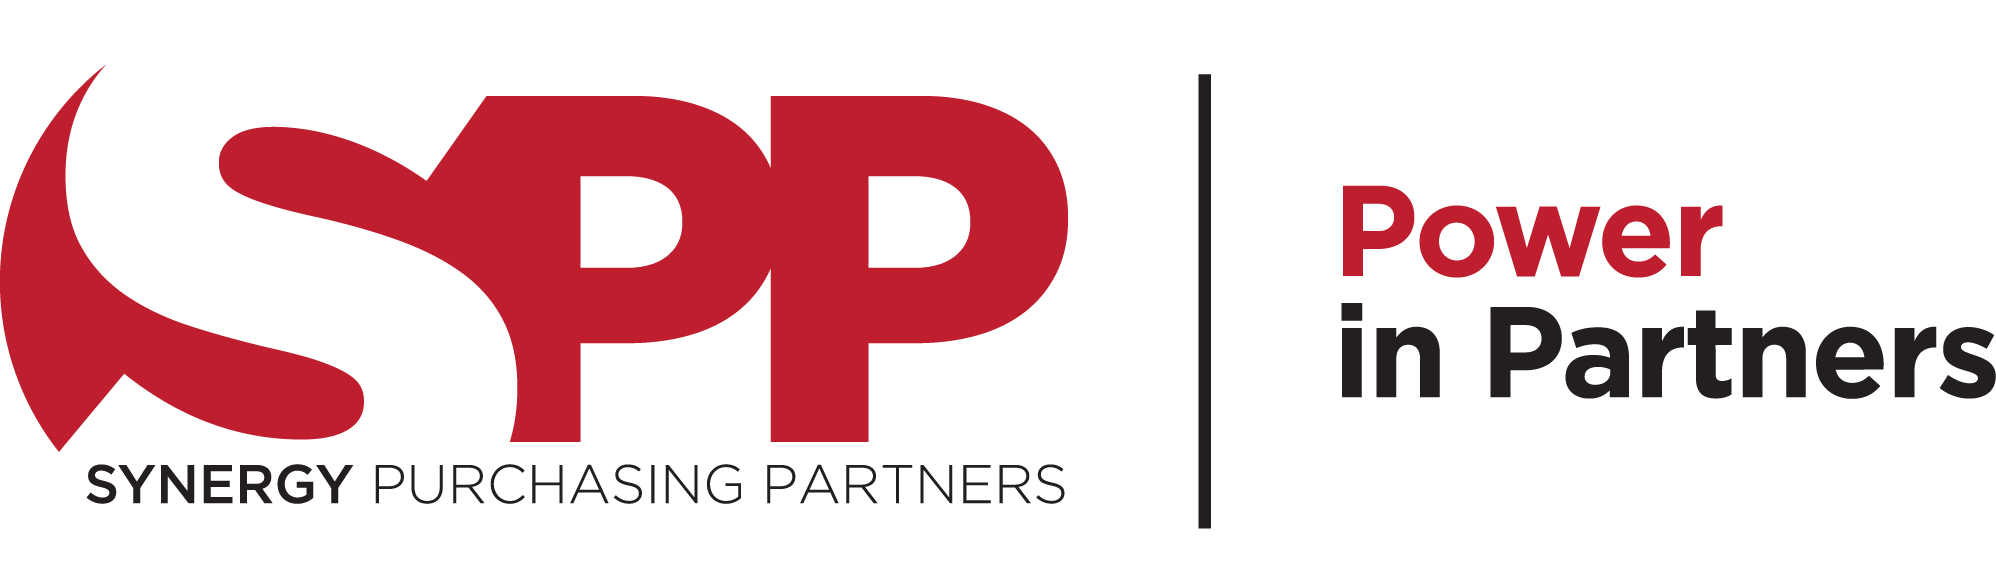 Synergy Purchasing Partners